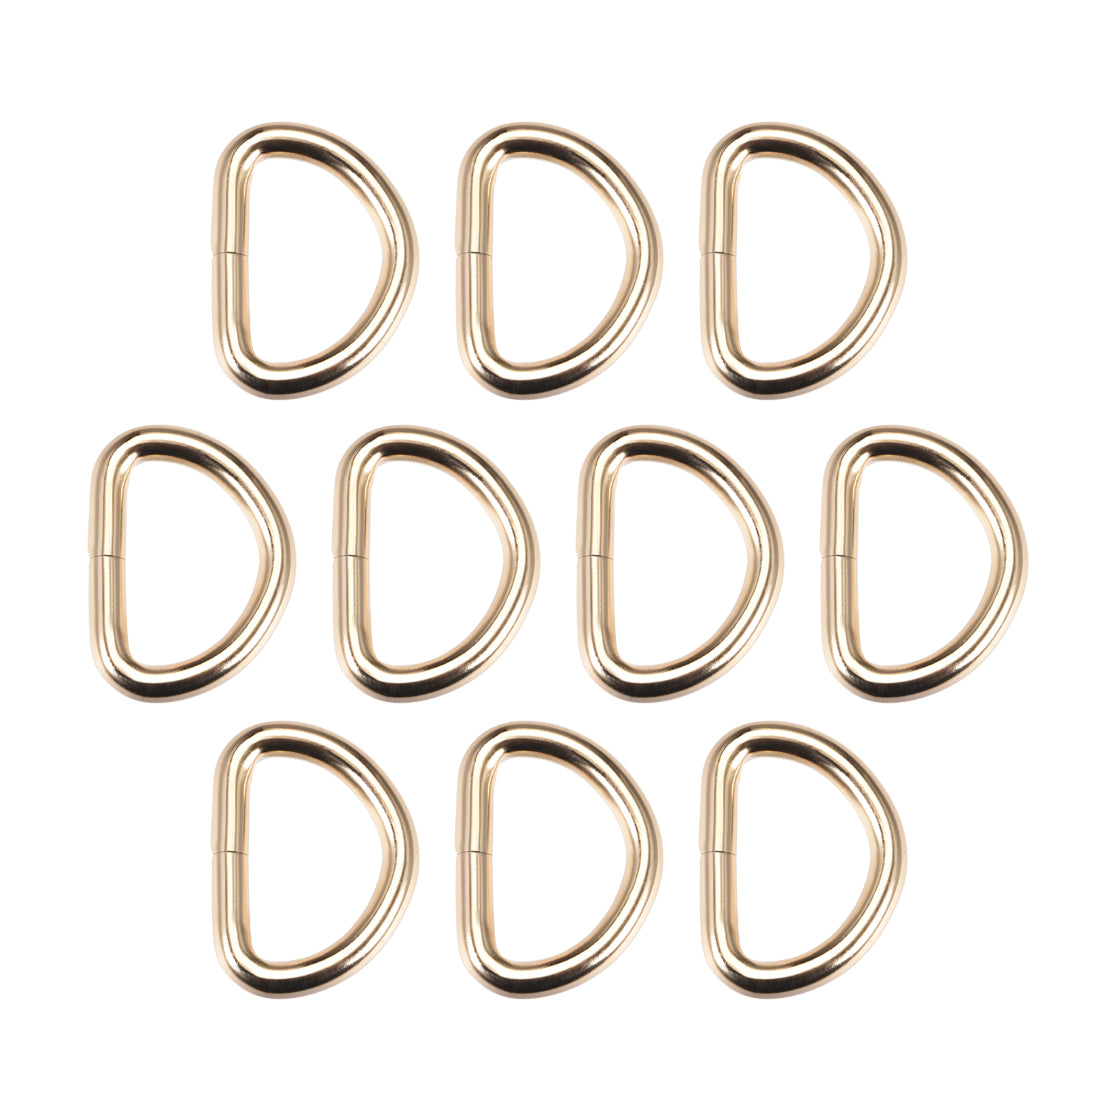 uxcell Uxcell 10 Pcs D Ring Buckle 1 Inch Metal Semi-Circular D-Rings Gold Tone for Hardware Bags Belts Craft DIY Accessories